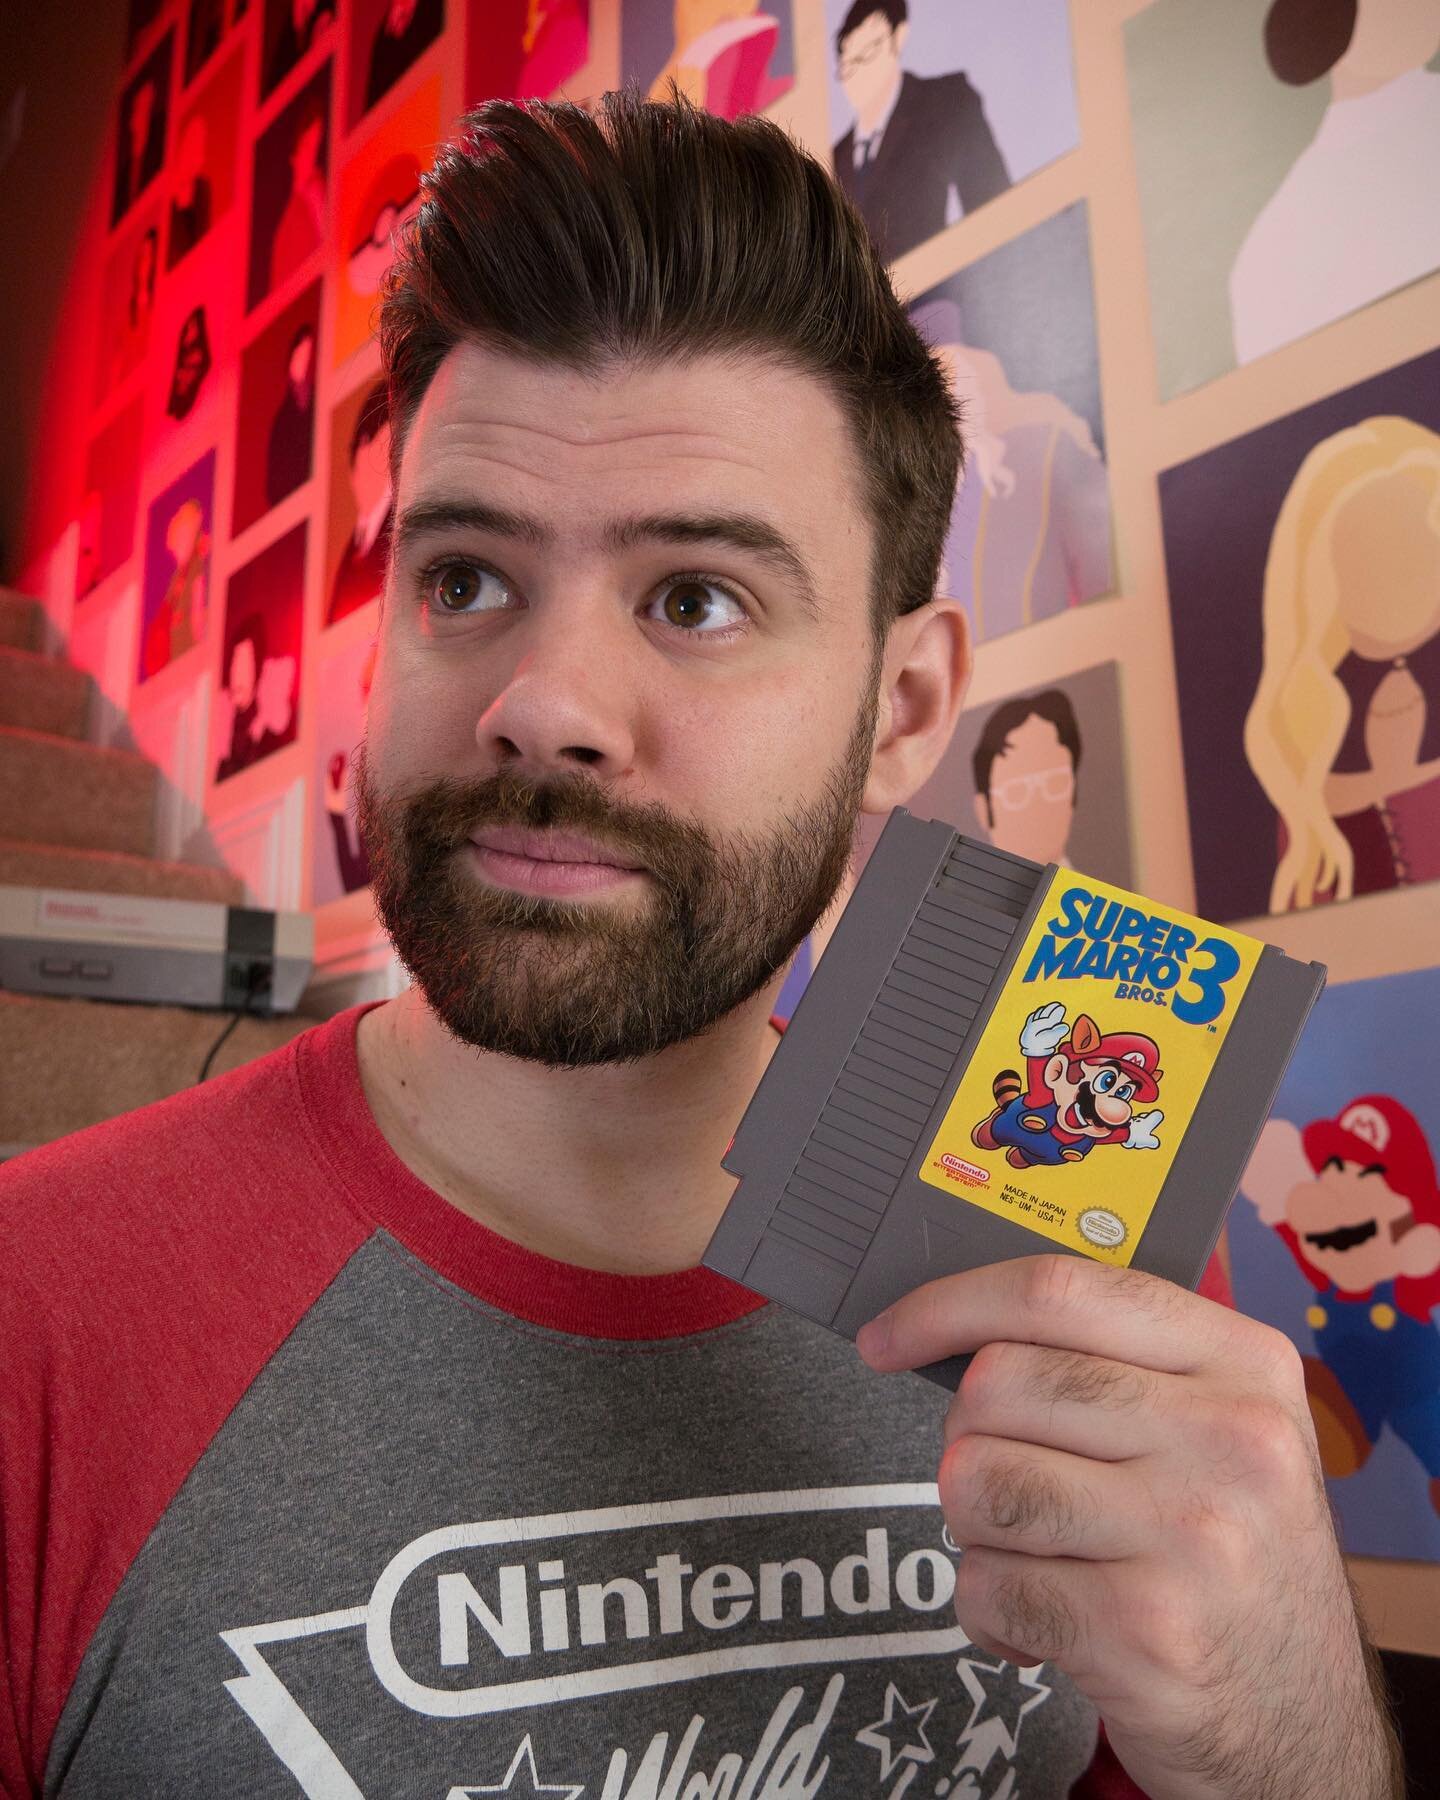 HAPPY MARIO DAY!! Super Mario Bros 3 is where it all began for me; the cartridge that introduced me to the wonderful world of video games. This little plumber forever changed the world, and that's worth celebrating! What was your first video game?
#M